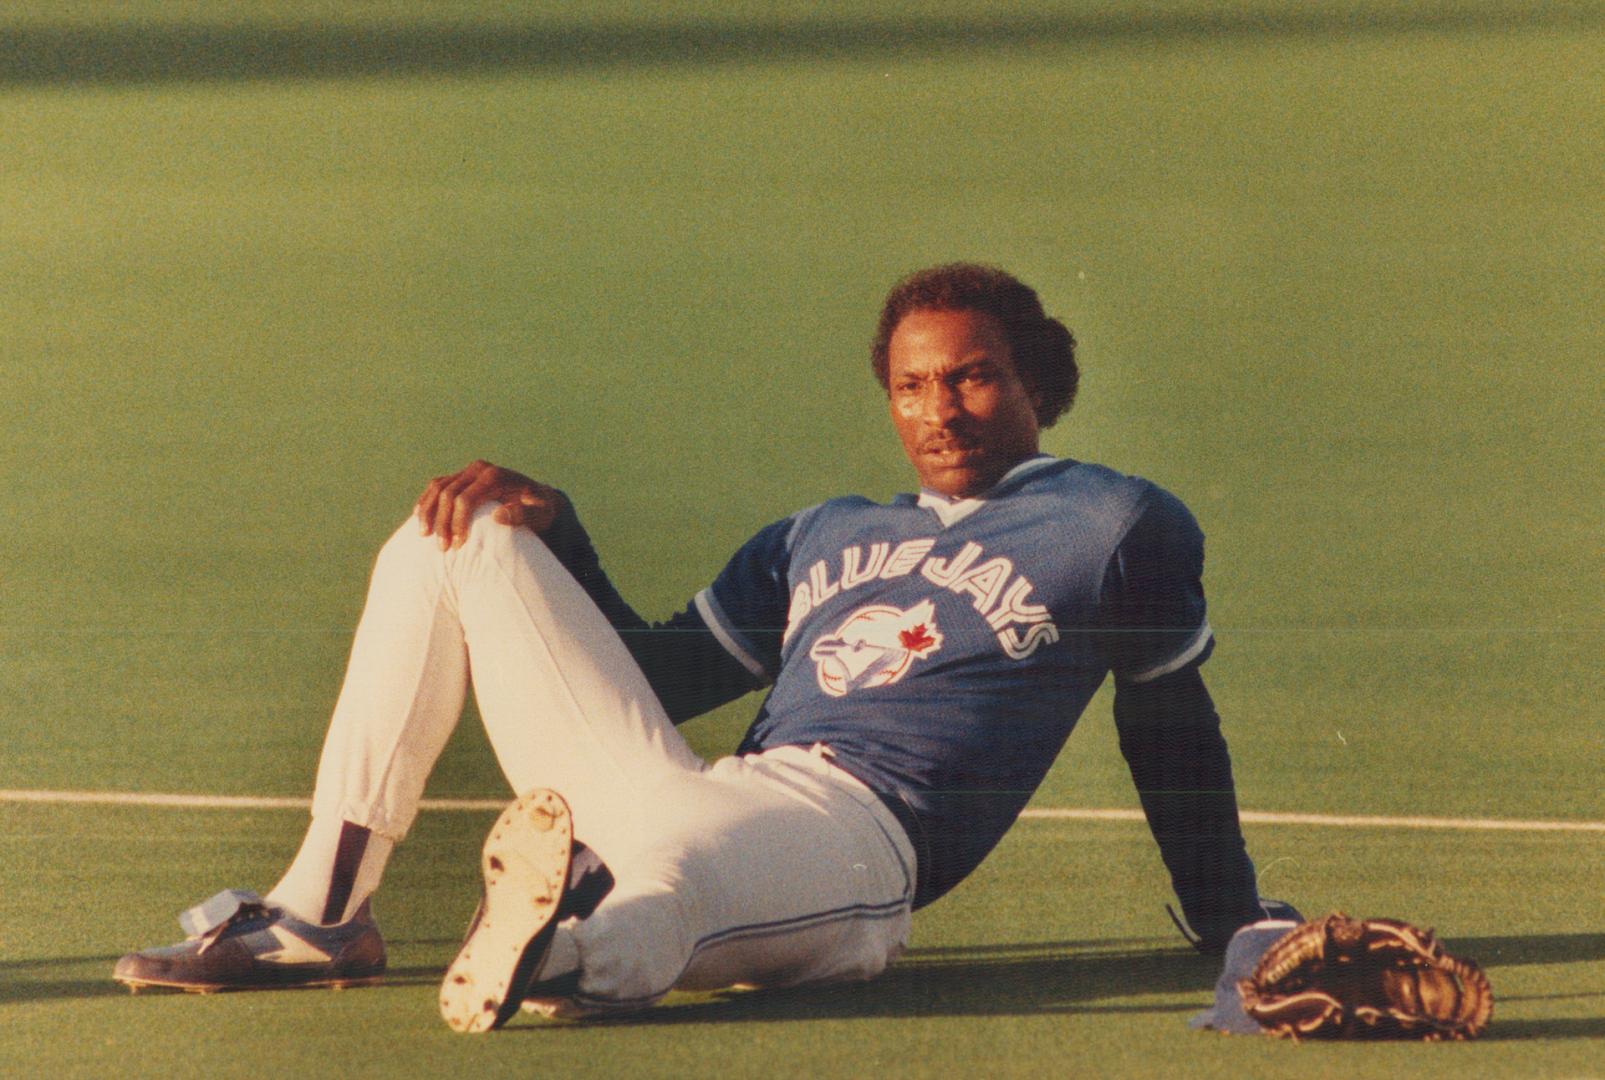 Jay's outfielder Lloyd Moseby seems to be staring off into space while he takes a break just hours before last night's crucial game